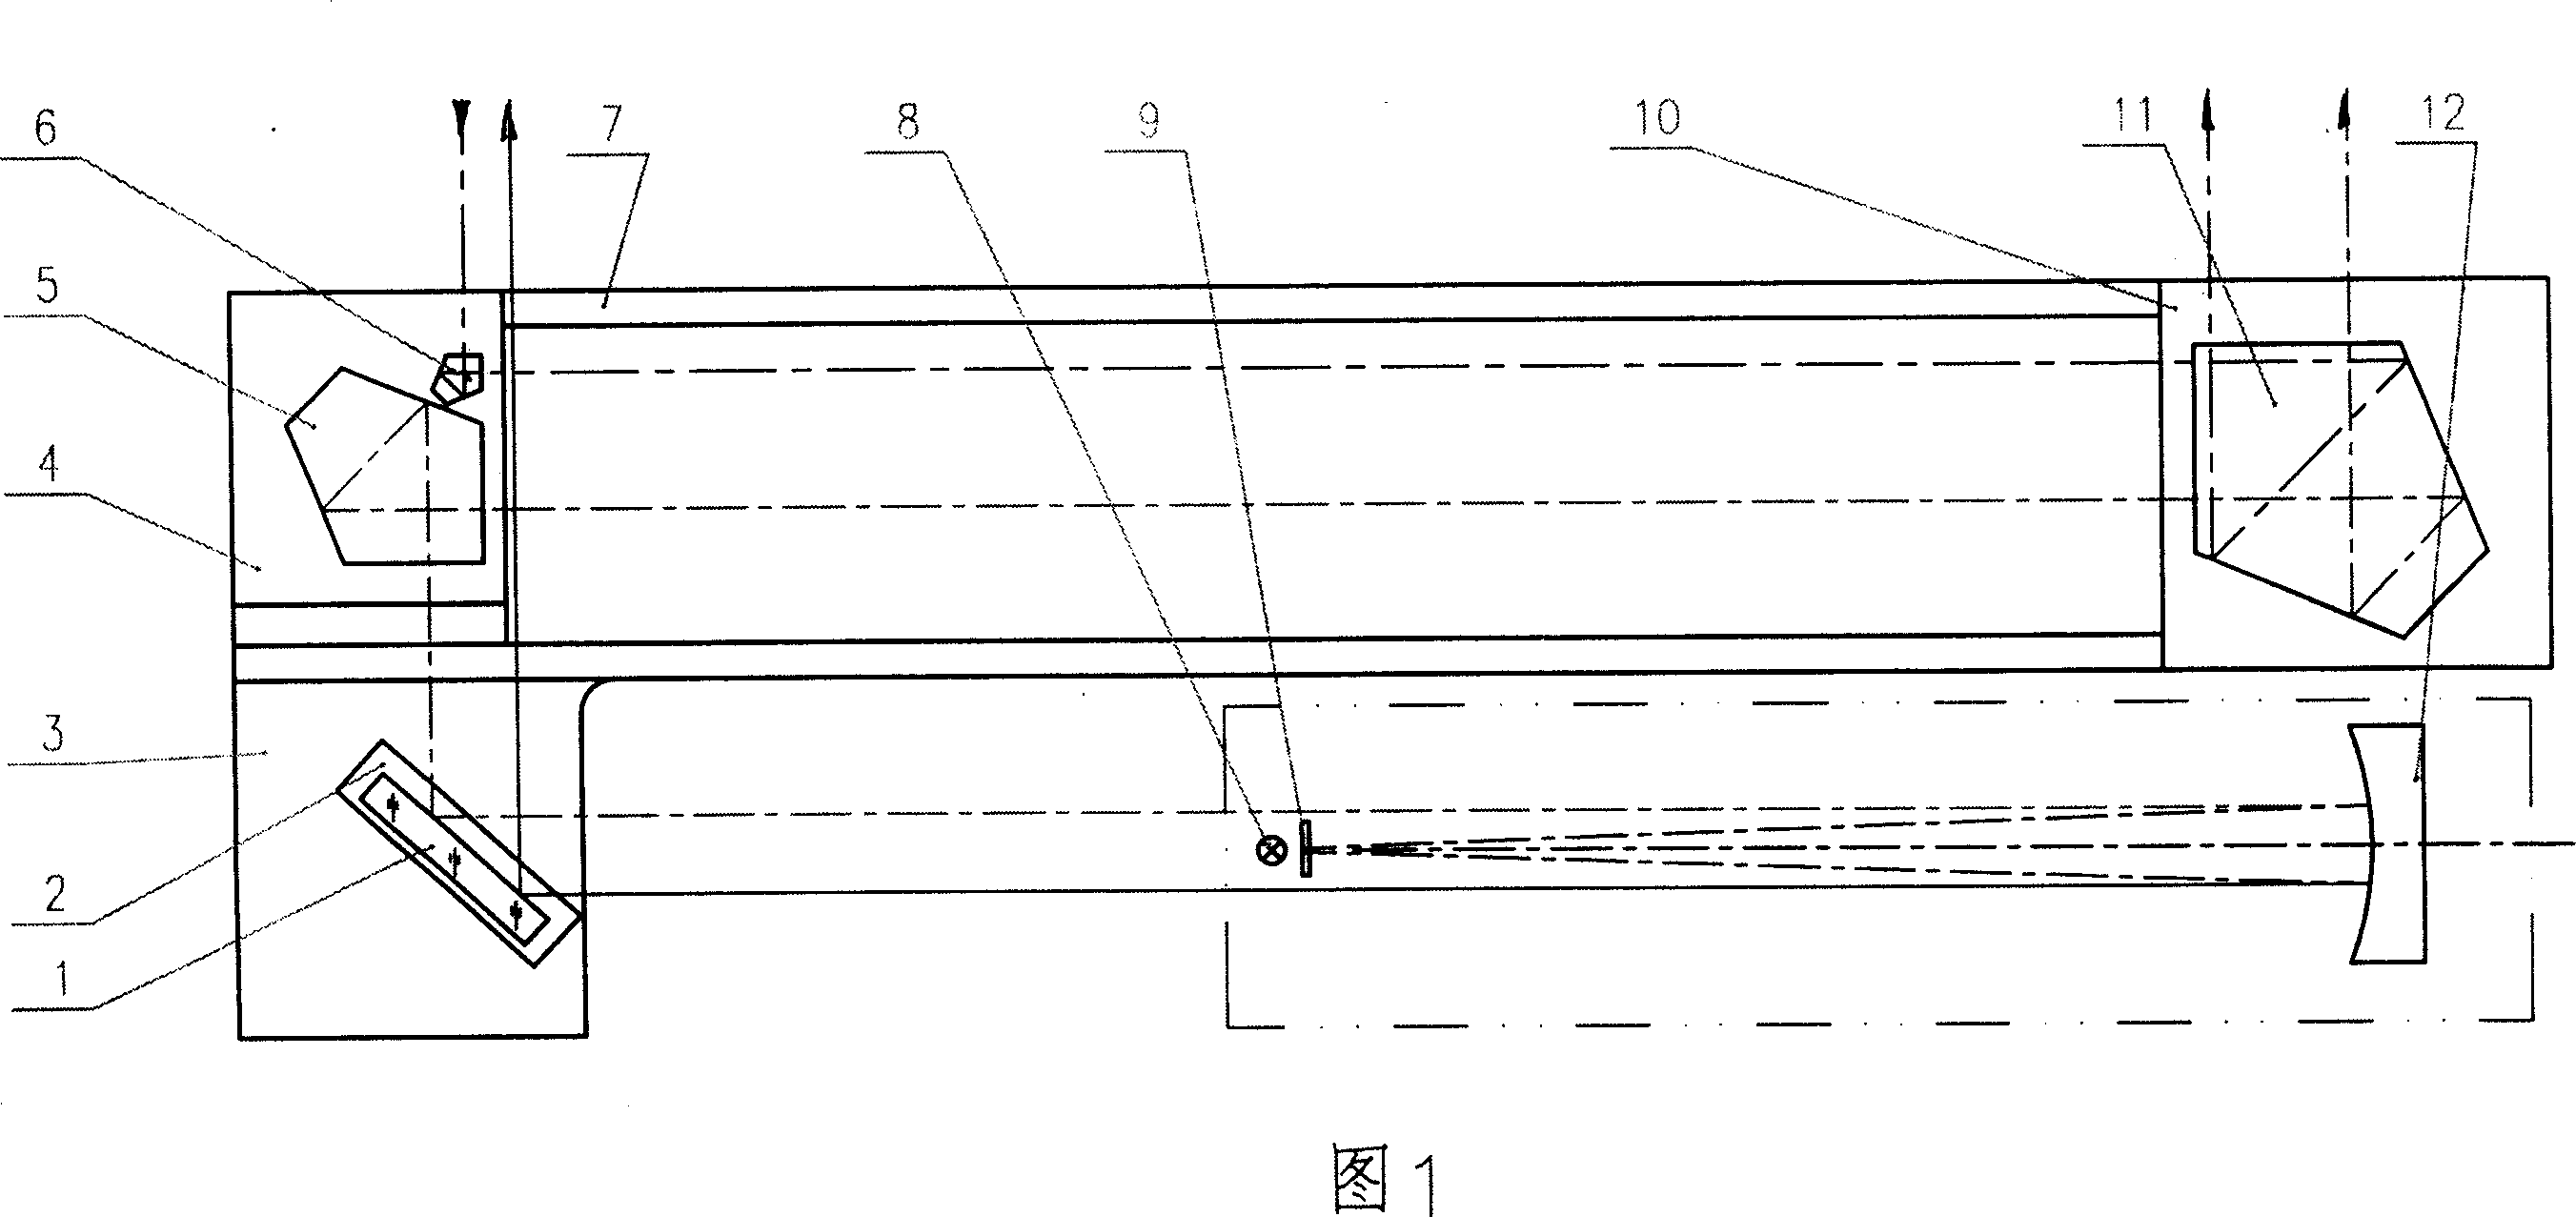 Device for detecting three-axle parallel of large photoelectric monitoring equipment using thermal target technology